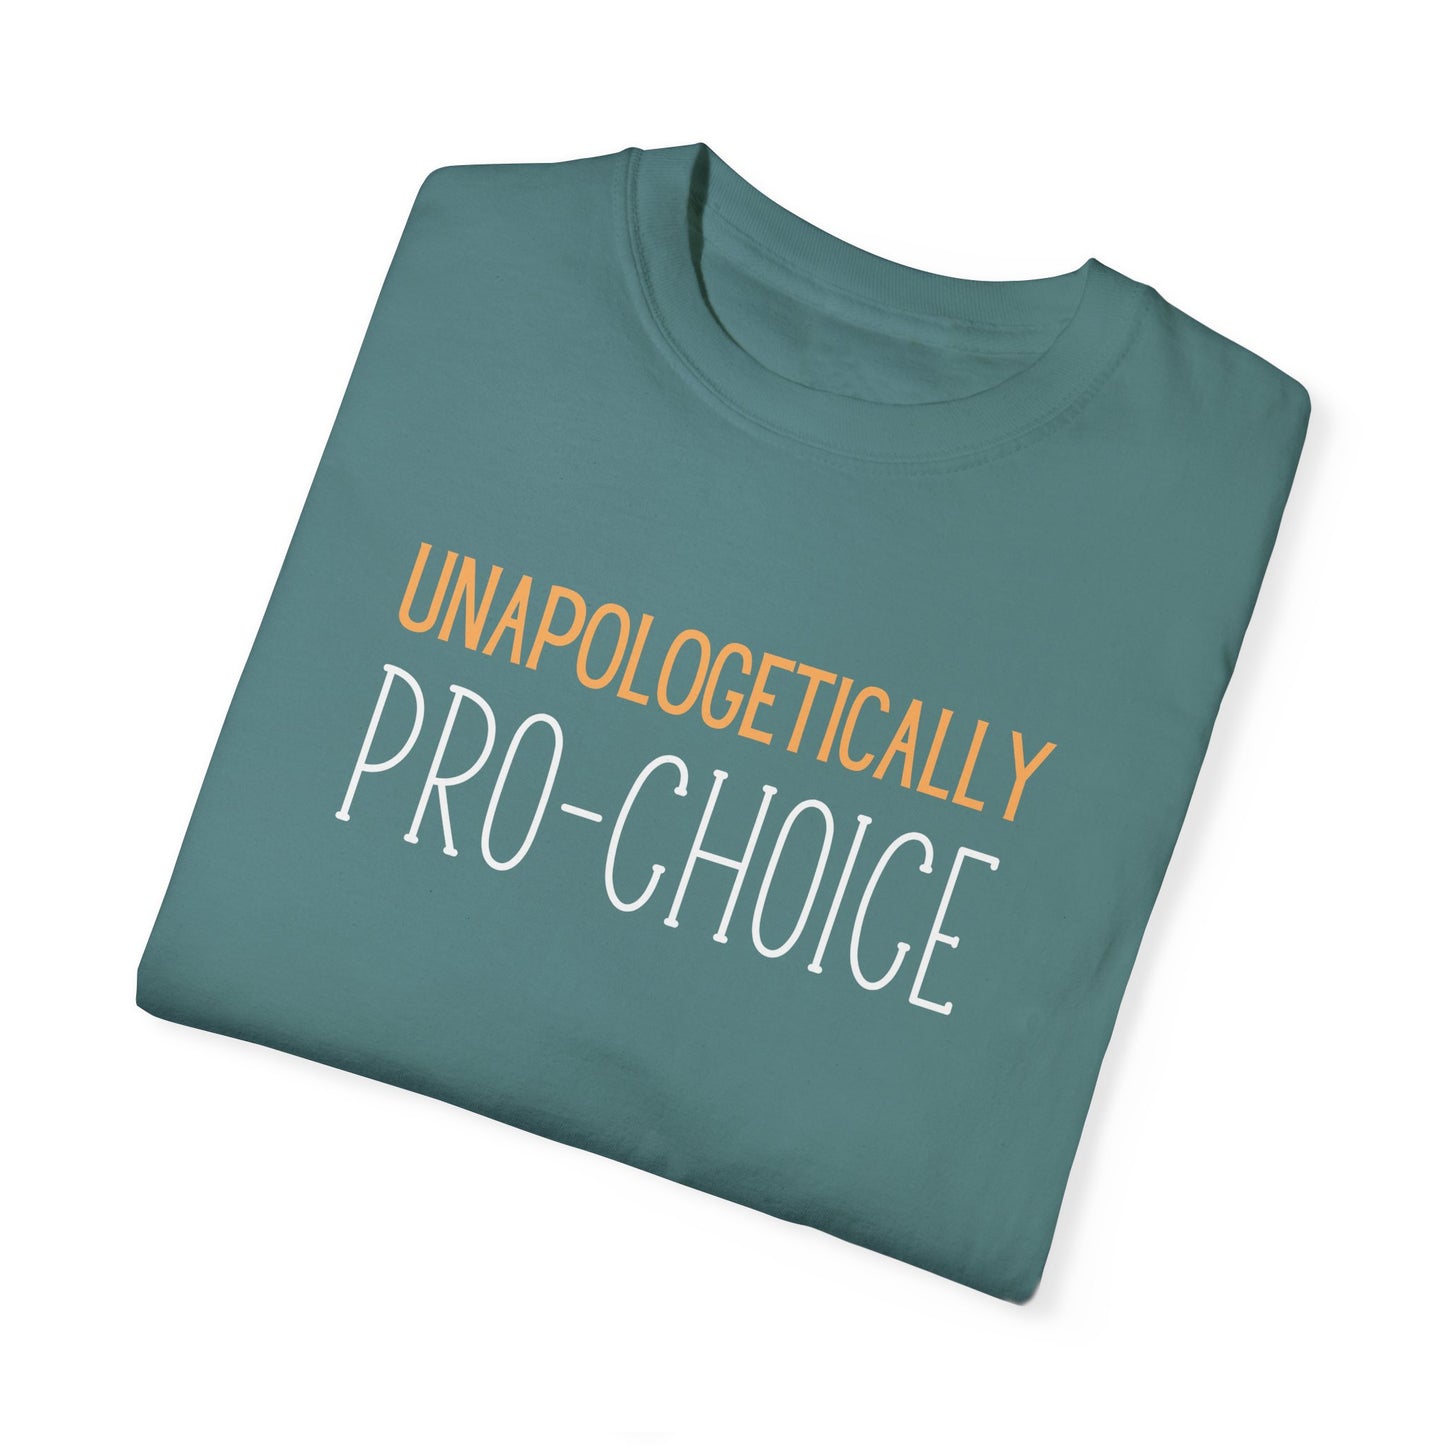 Create a collective atmosphere at any social justice event or meeting with matching Blue Spruce t-shirts, sporting this important message for reproductive healthcare rights